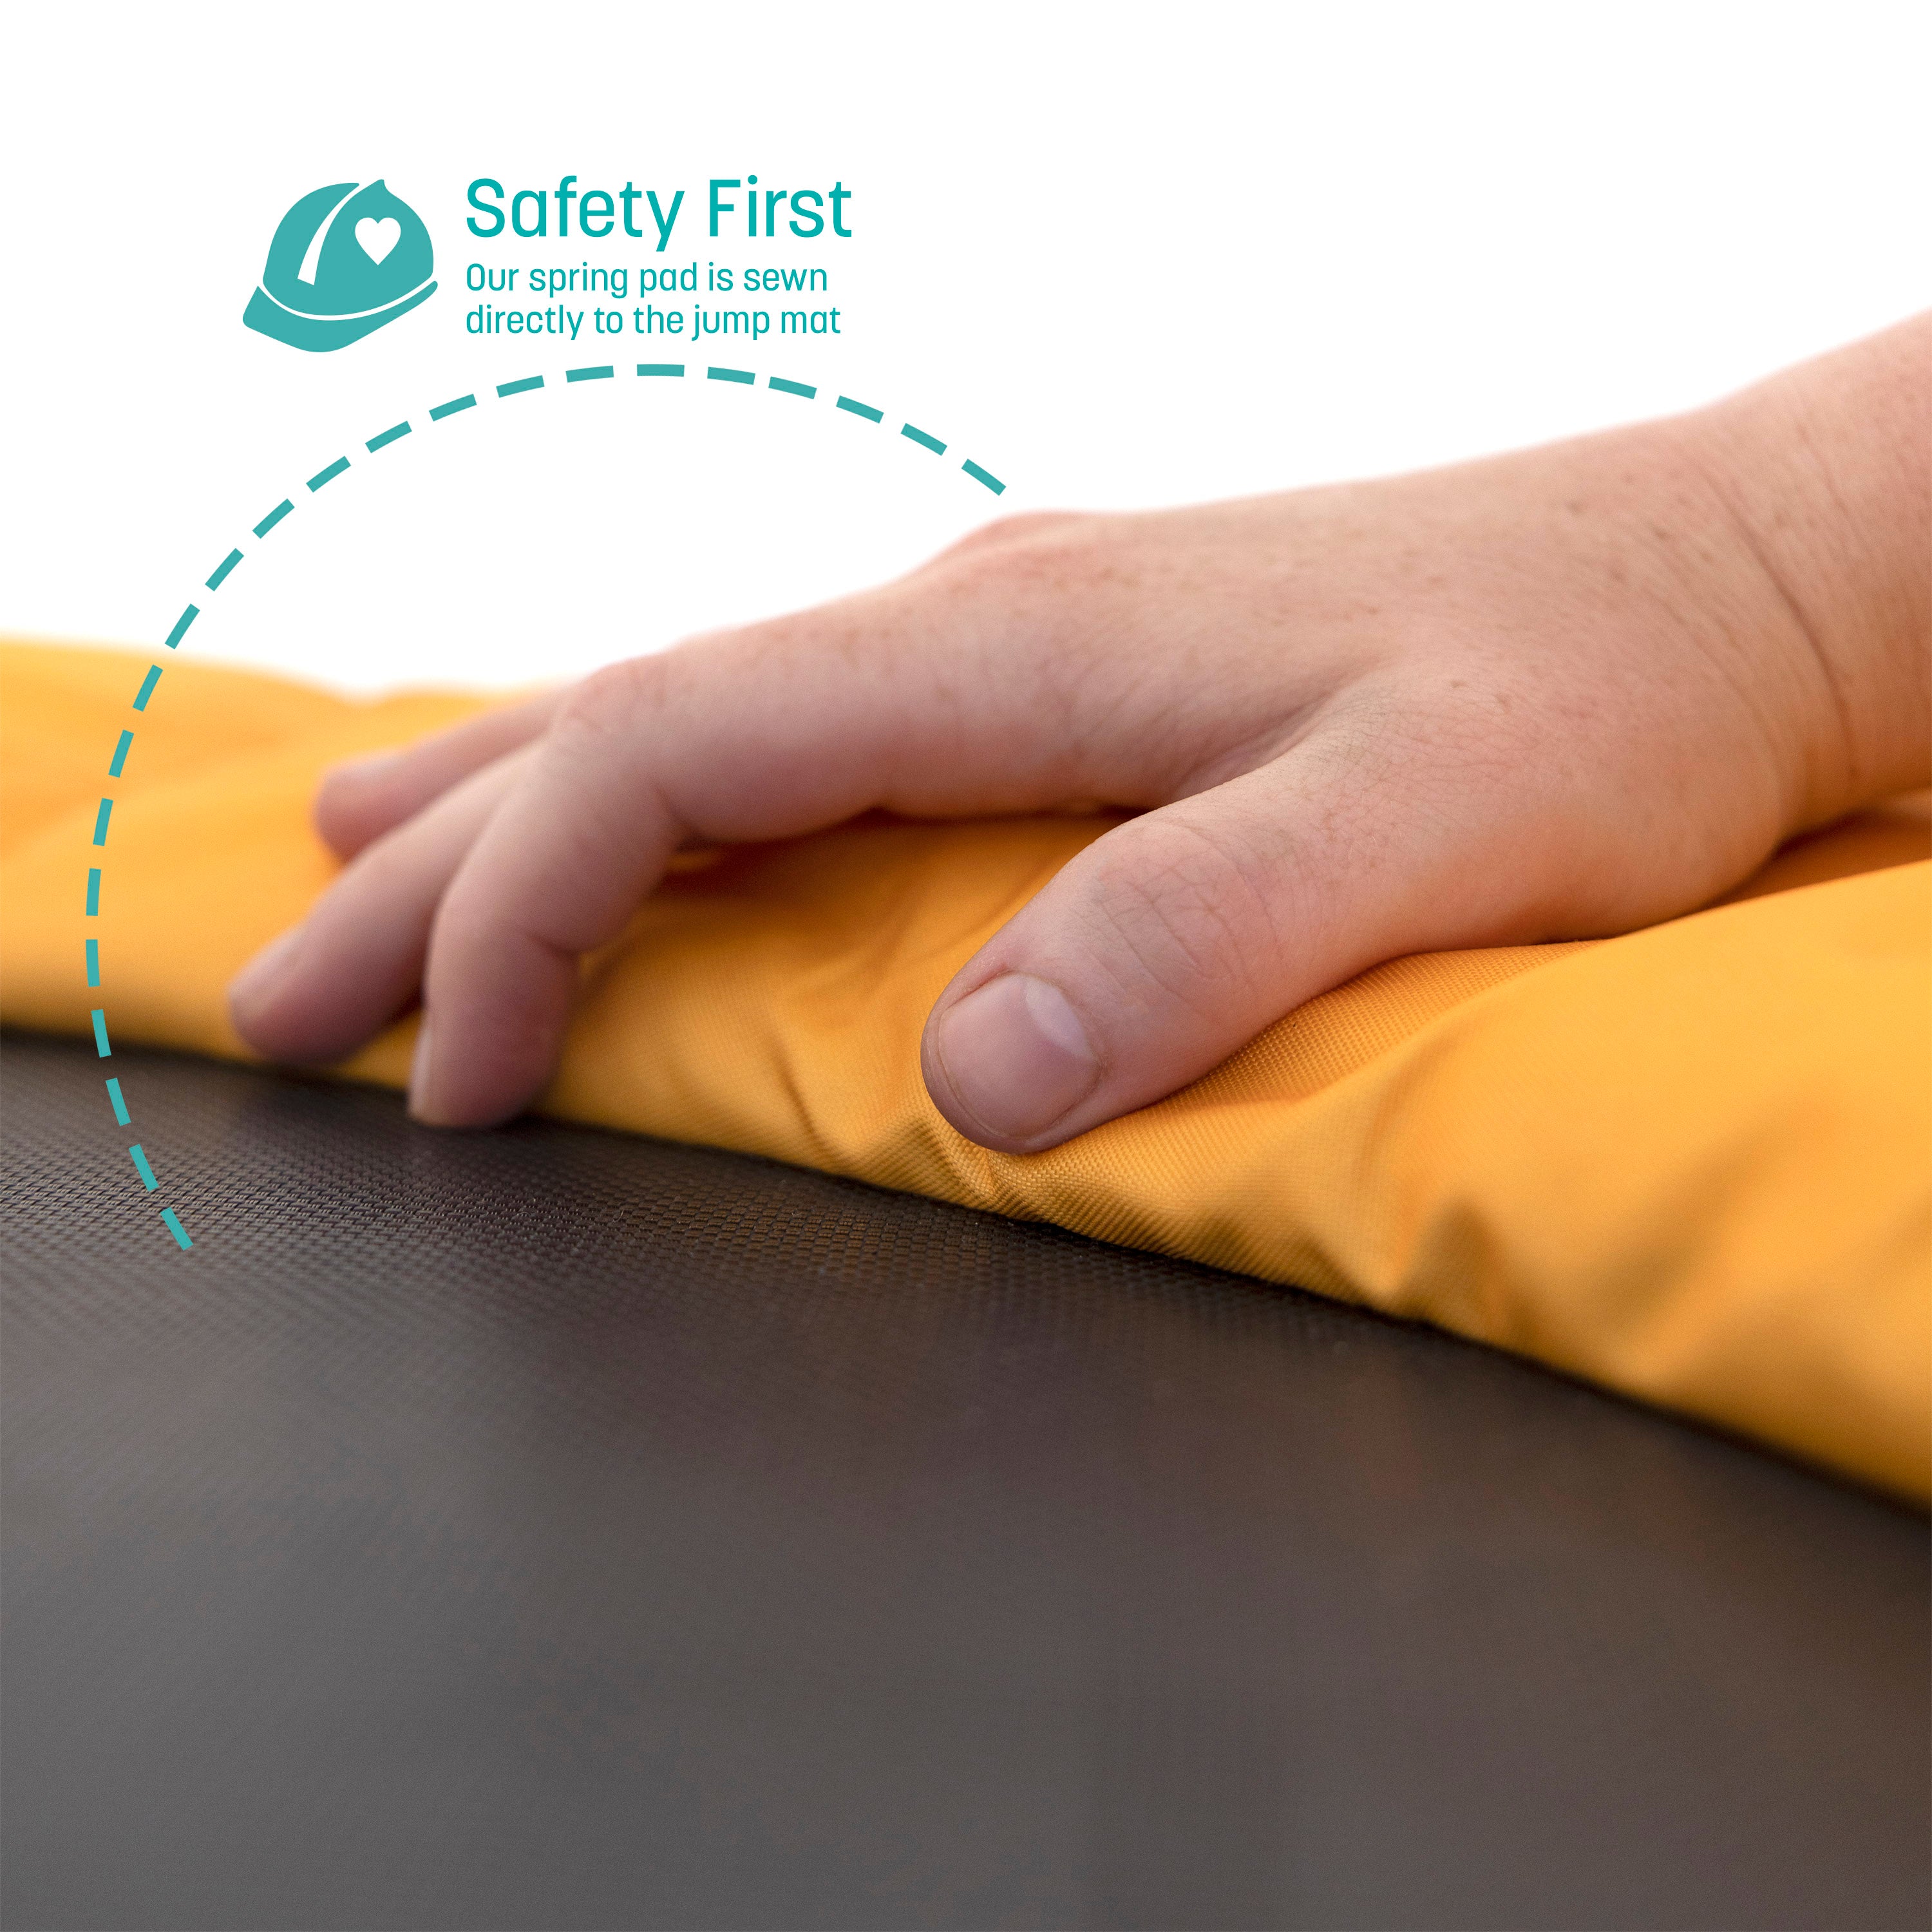 A hand rests on the yellow spring pad. A teal callout feature states, “Safety First: Our spring pad is sewn directly to the jump mat.”